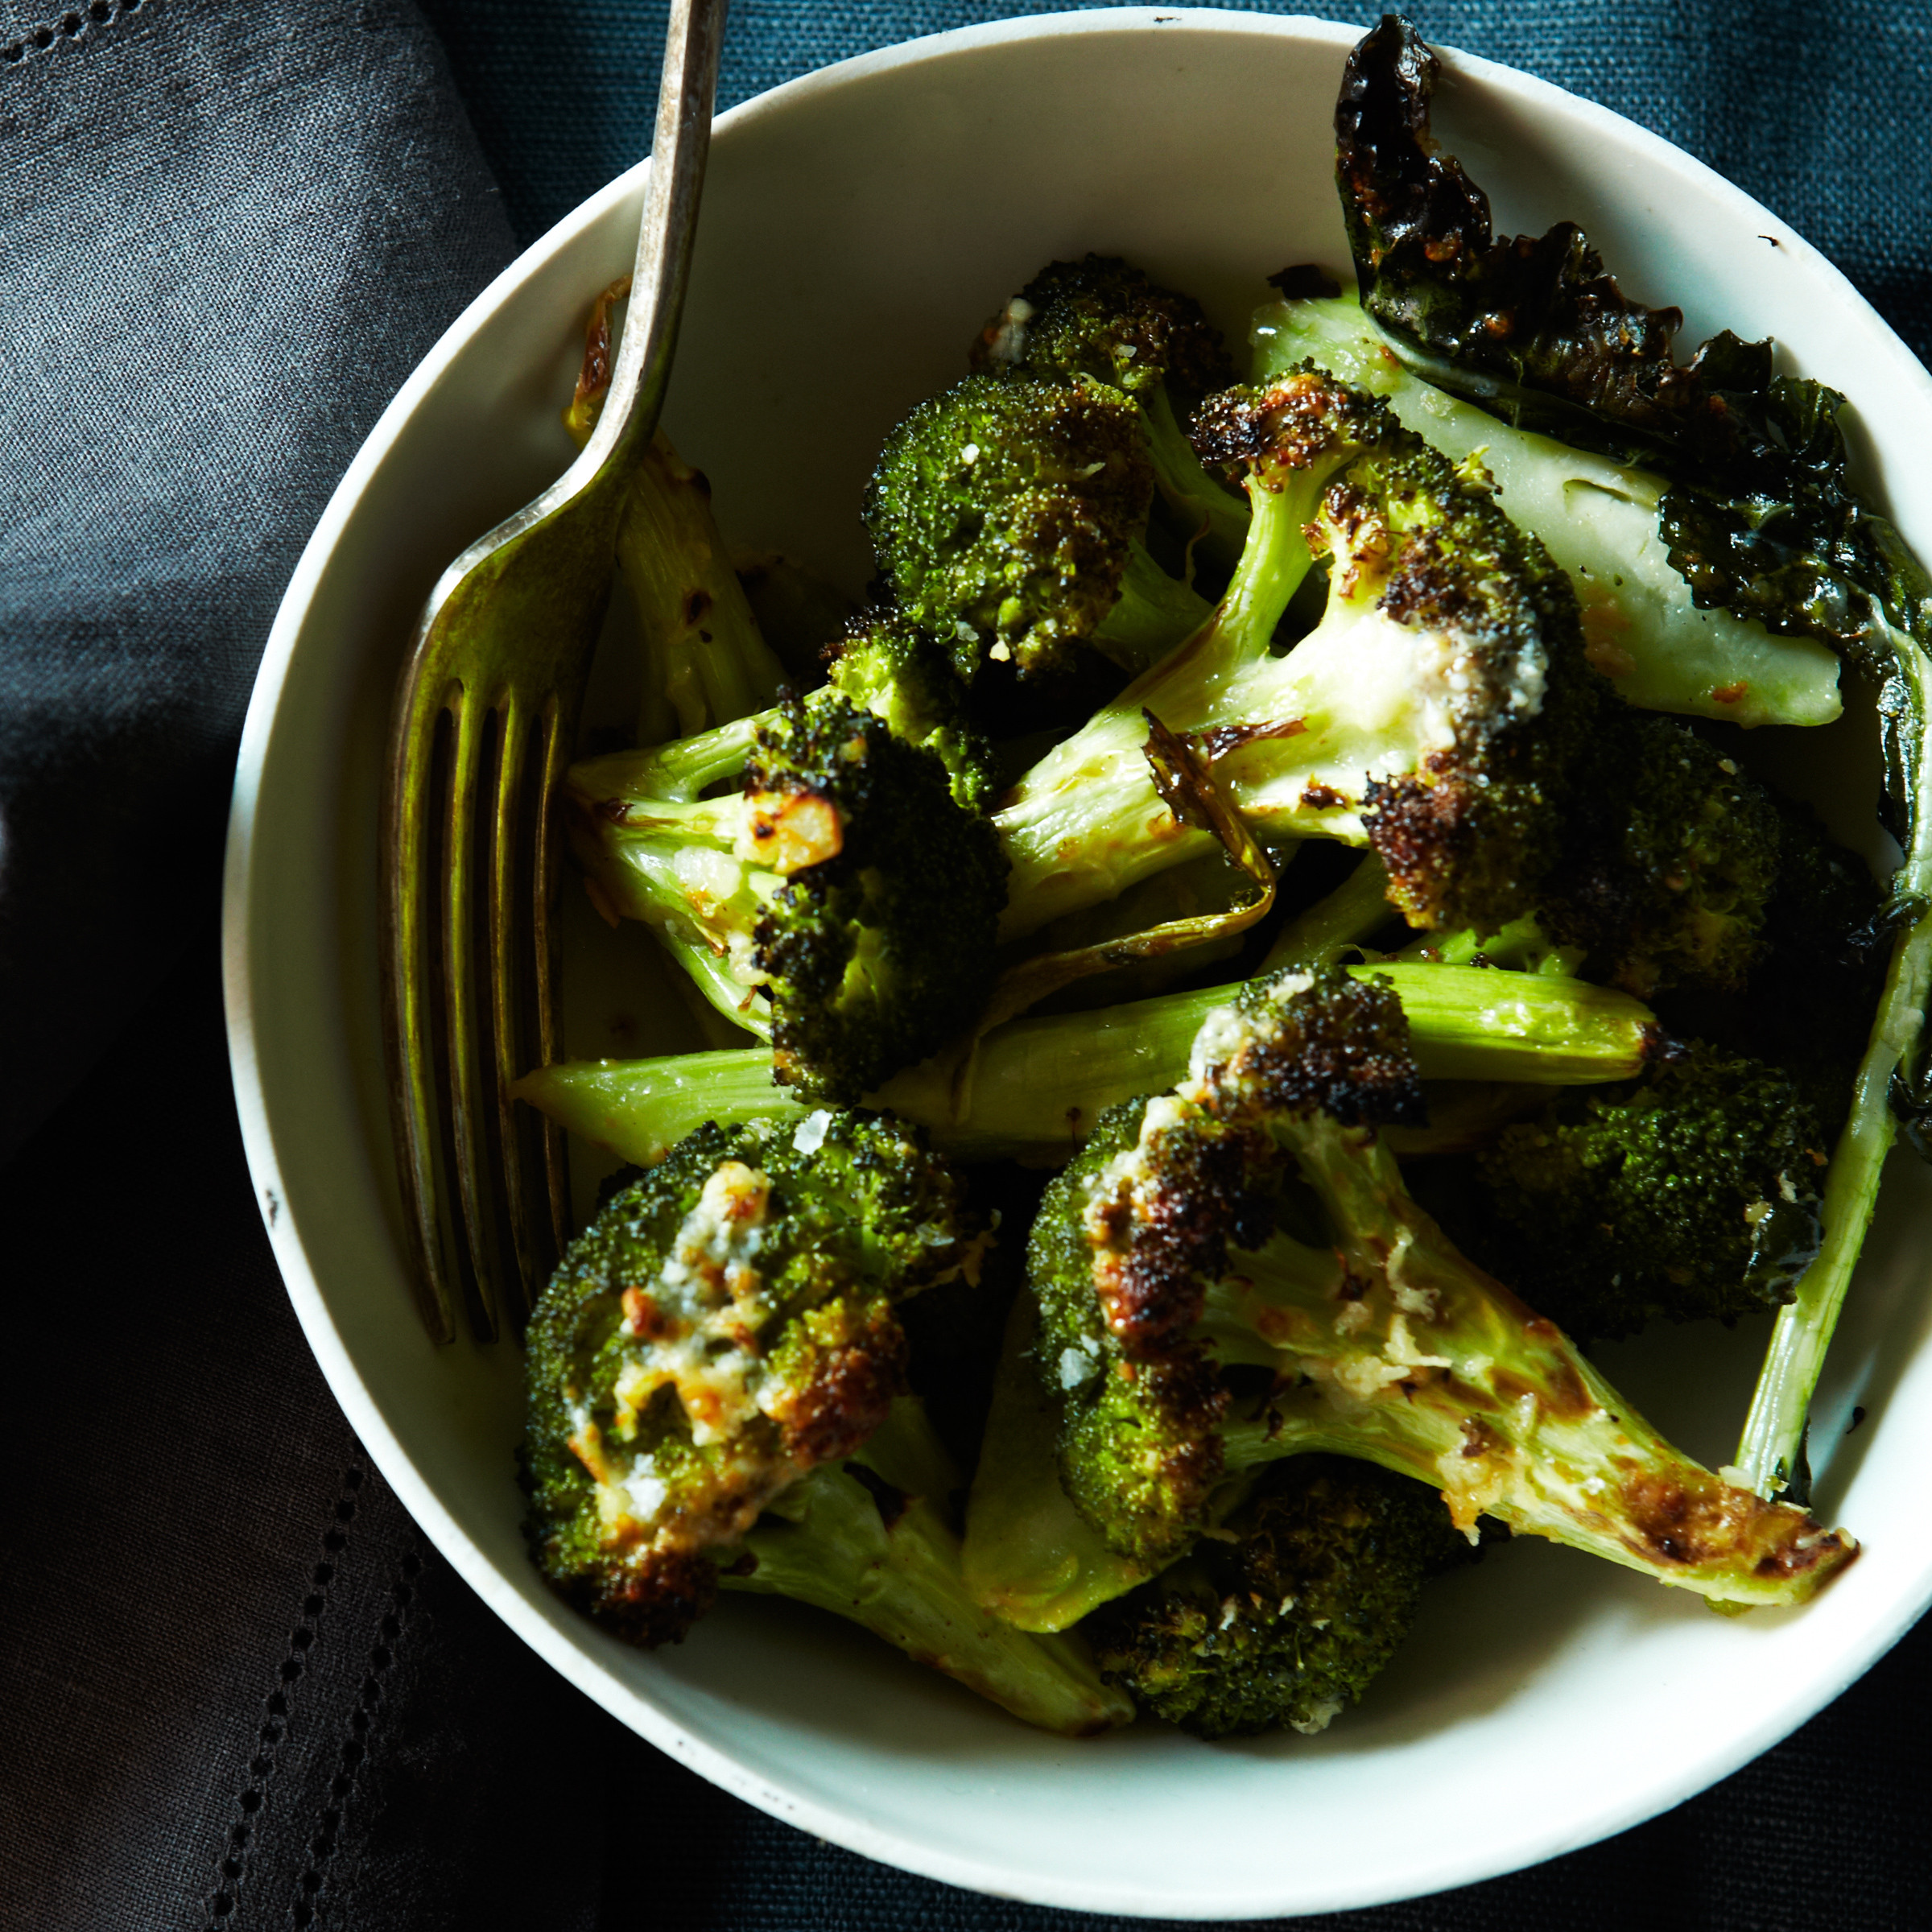 Best Christmas Vegetable Side Dishes
 Roasted Garlic Parmigiano Broccoli Recipe Grace Parisi